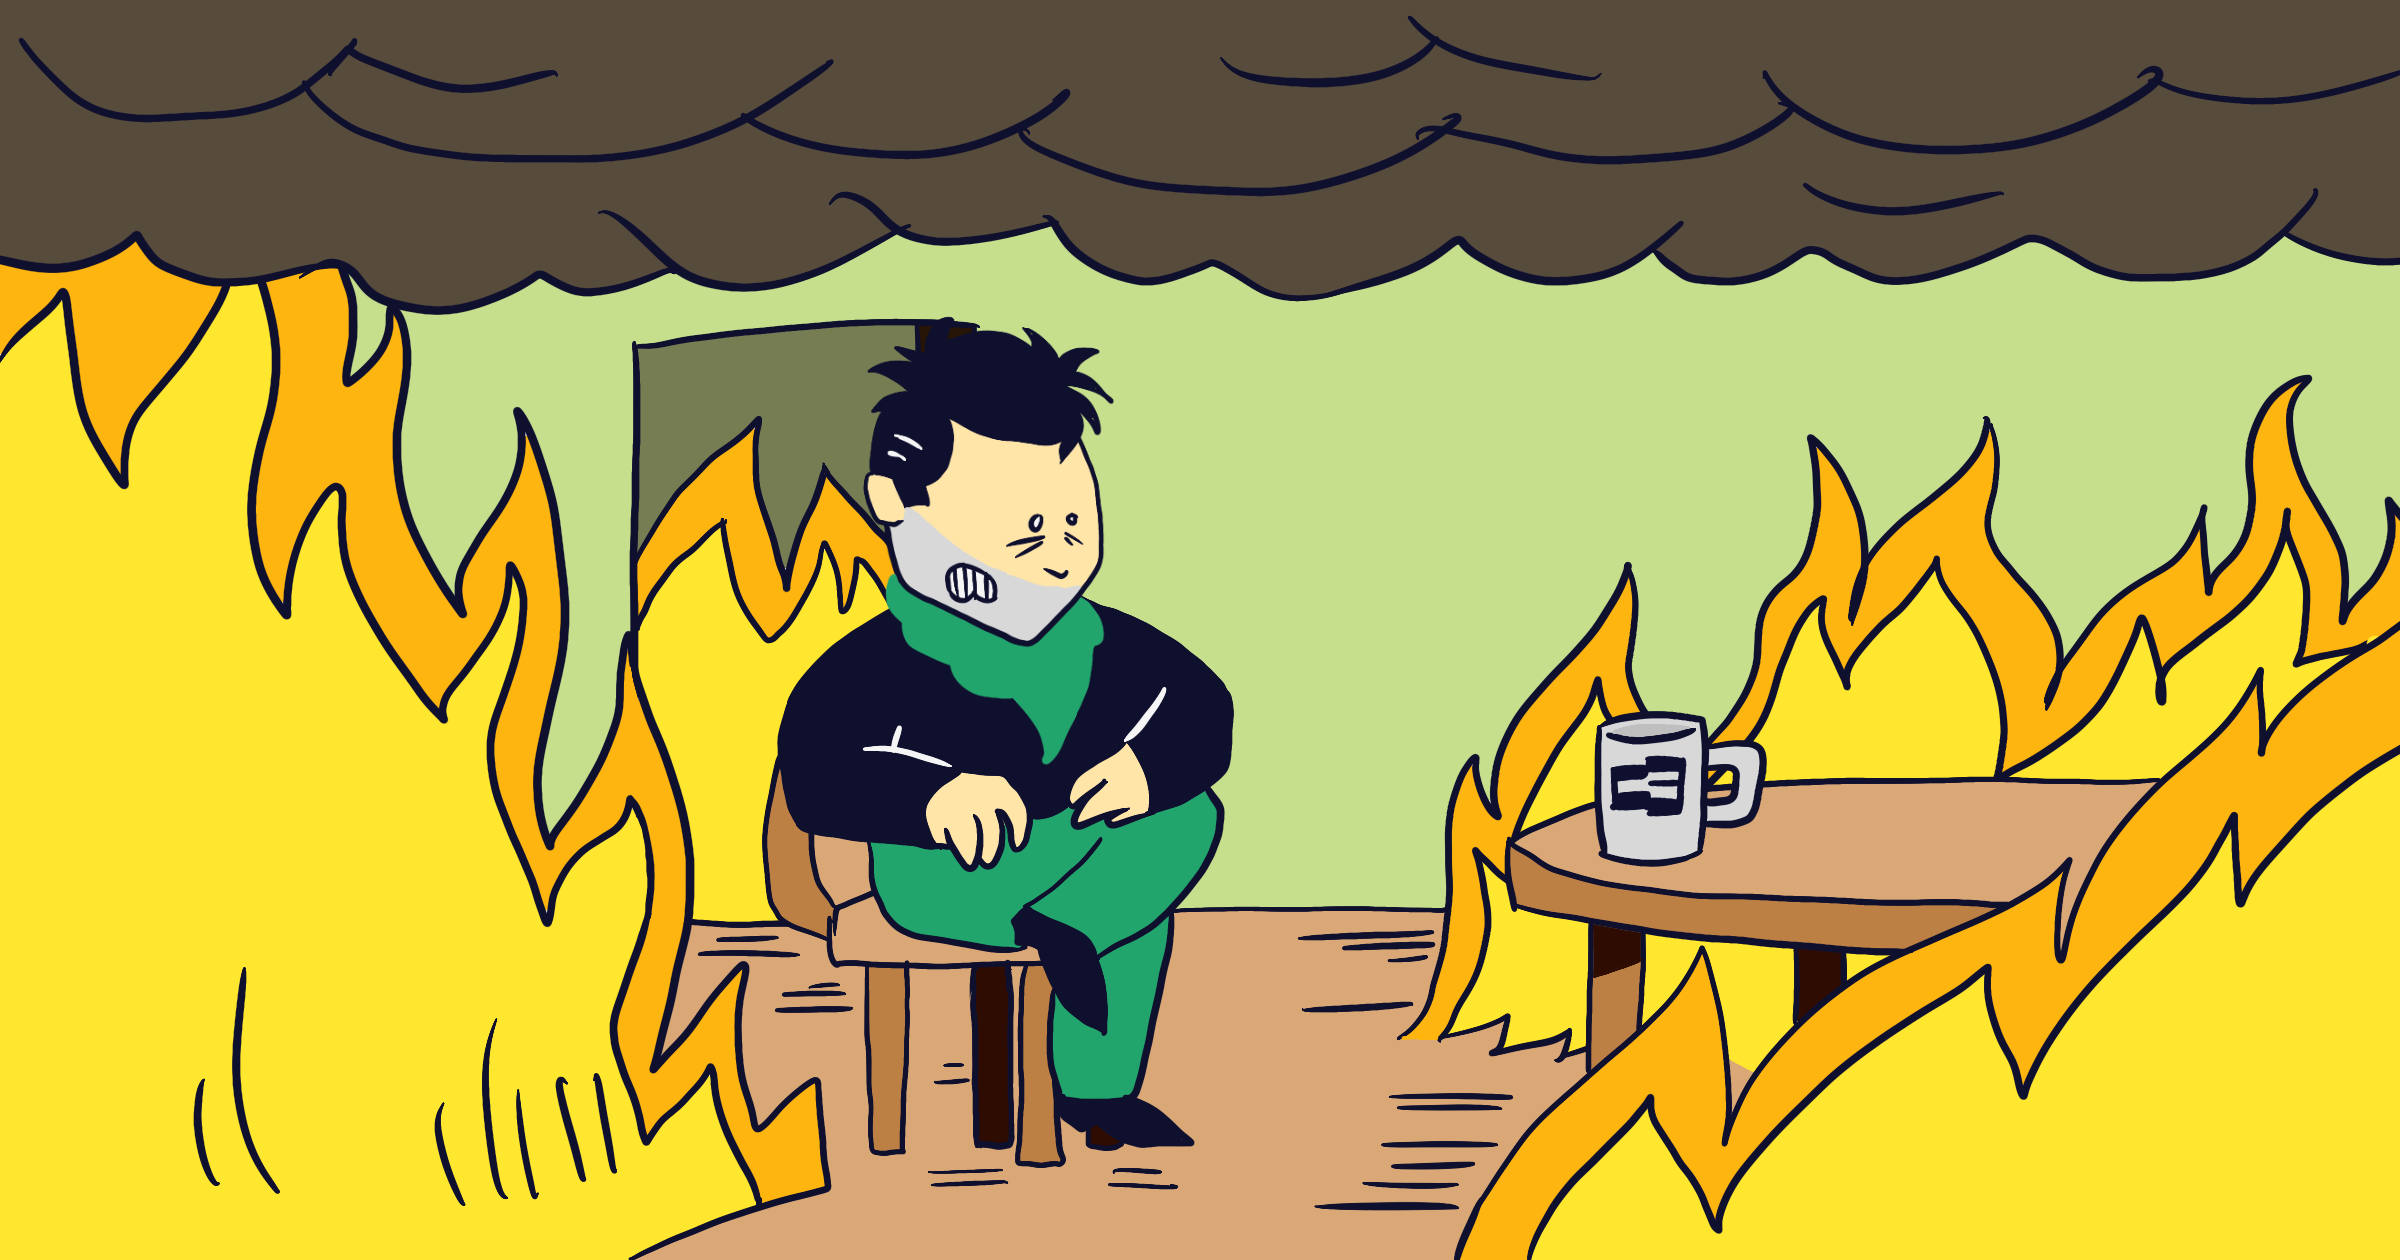 Illustrated Carlos Eriksson sitting in a house on fire. A reinterpritaion of This Is Fine.